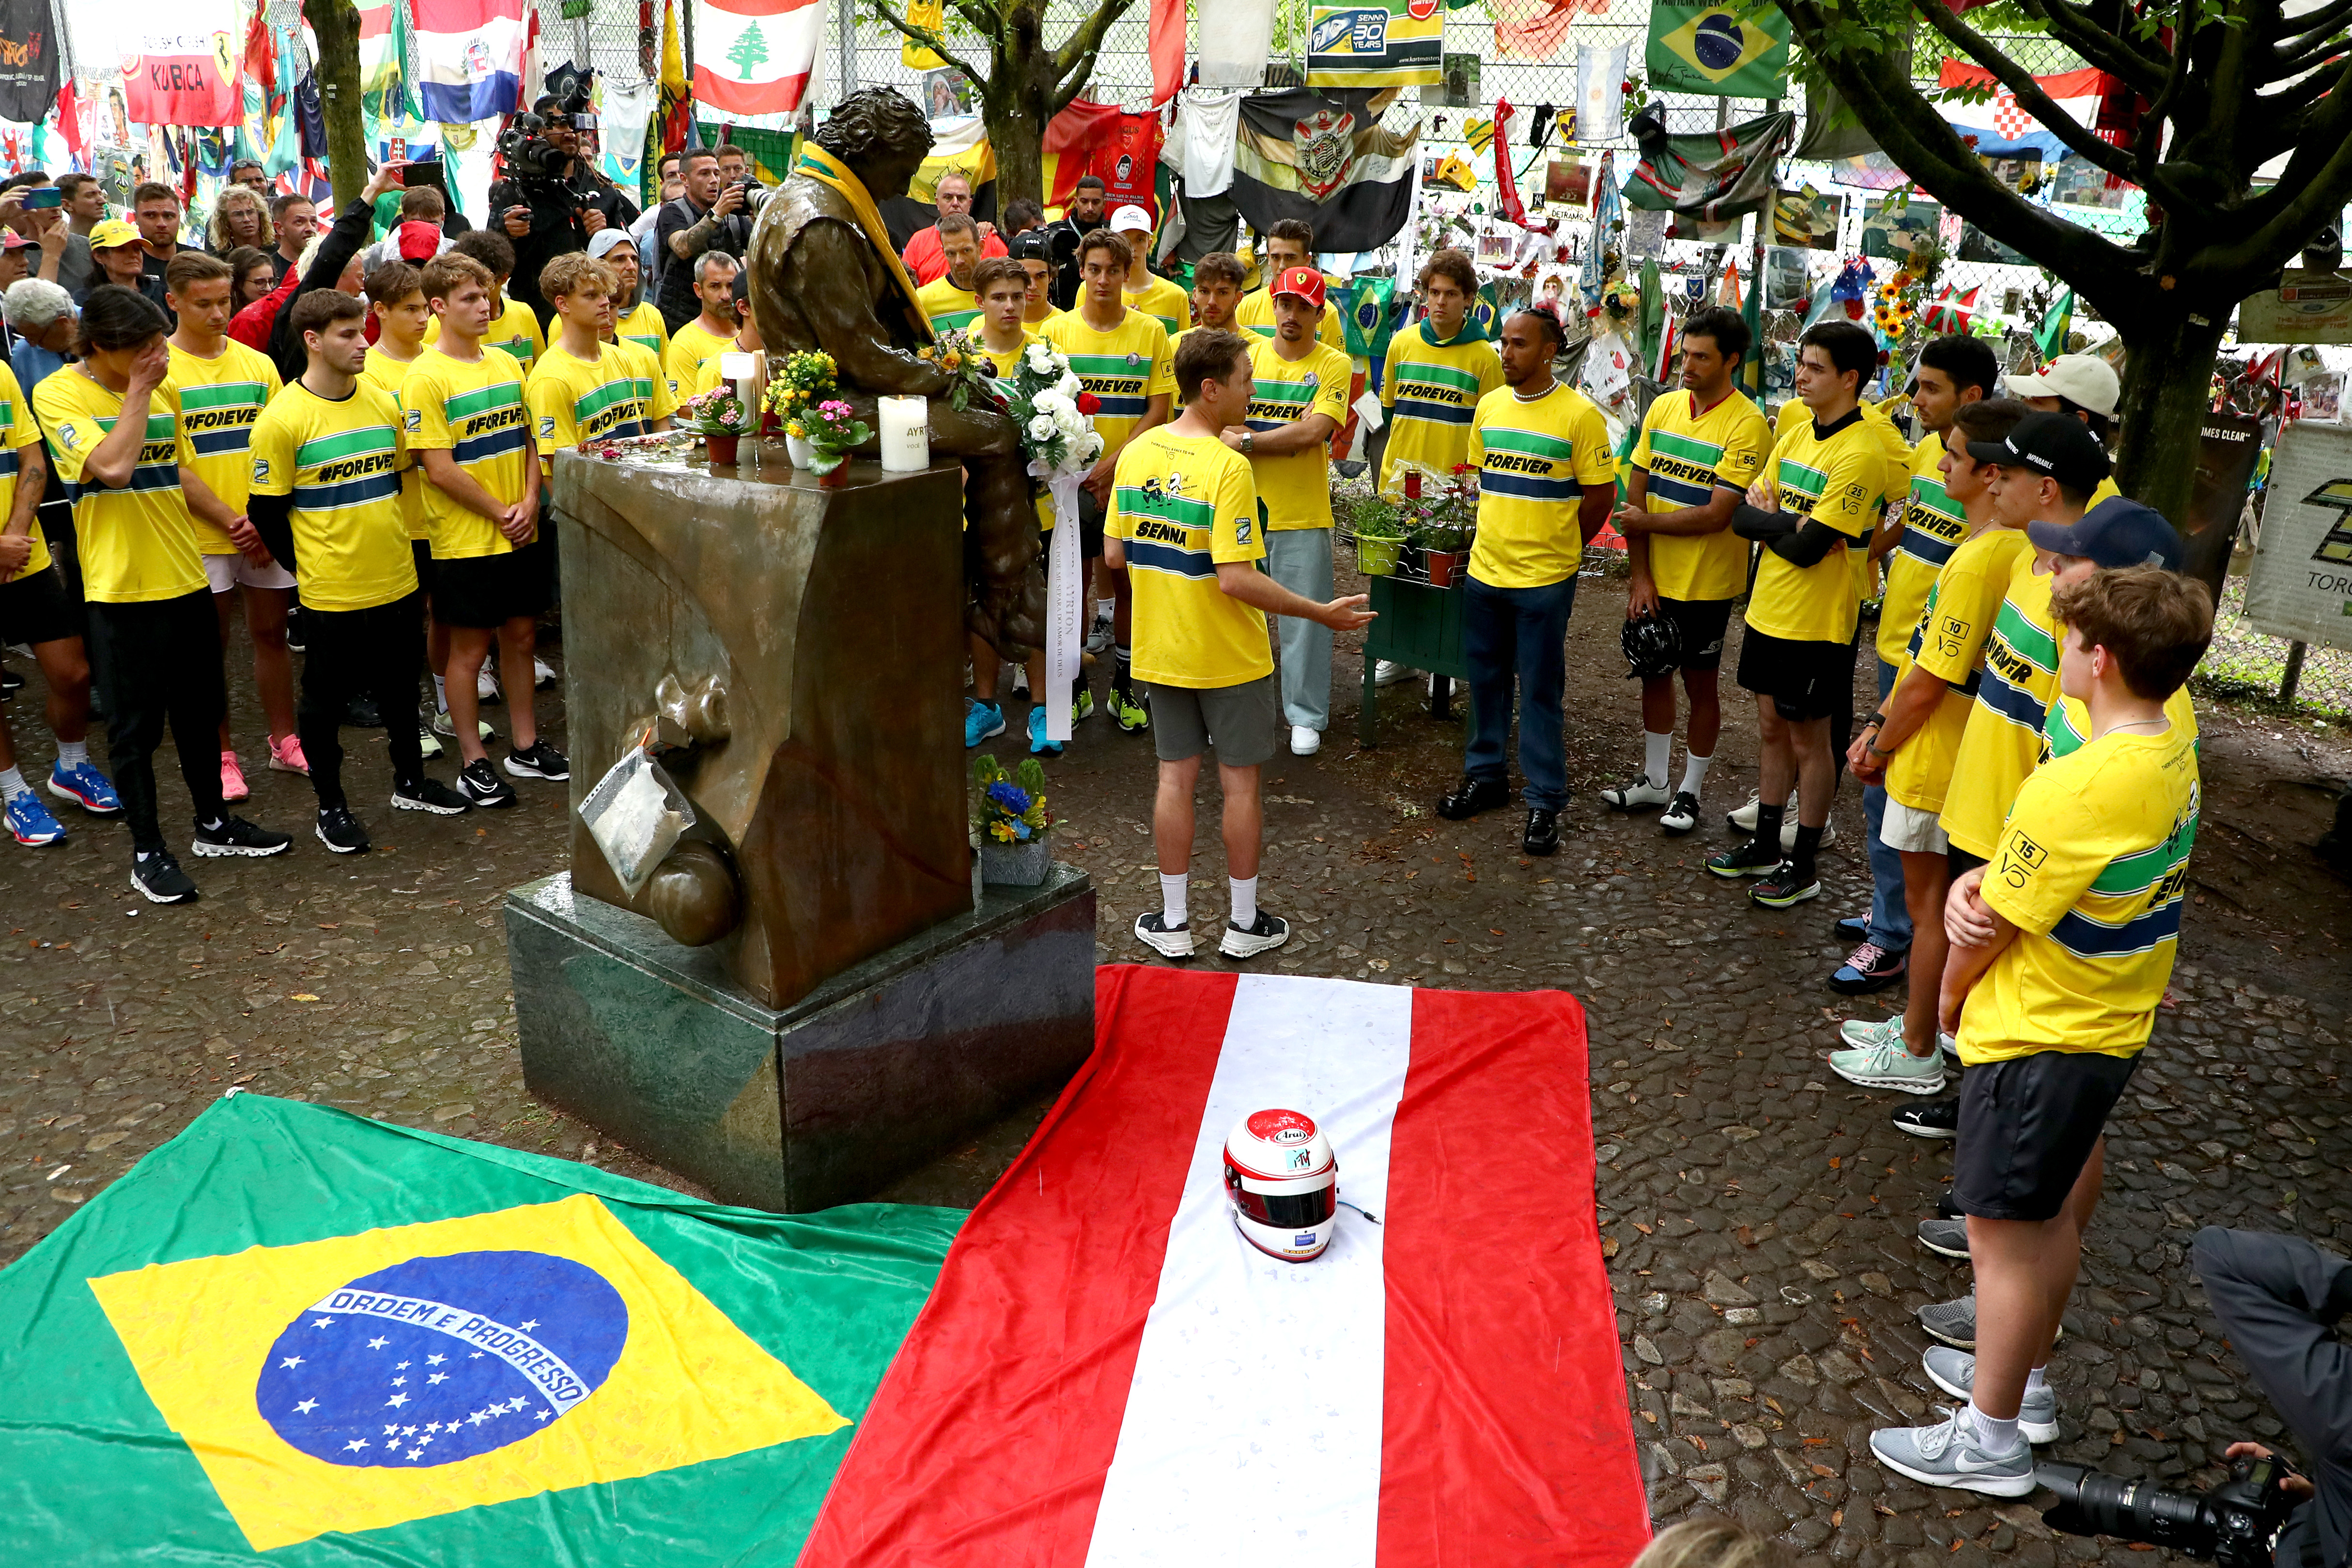 F1 drivers pay homage to Ayrton Senna and Roland Ratzenberger ahead of
Imola GP